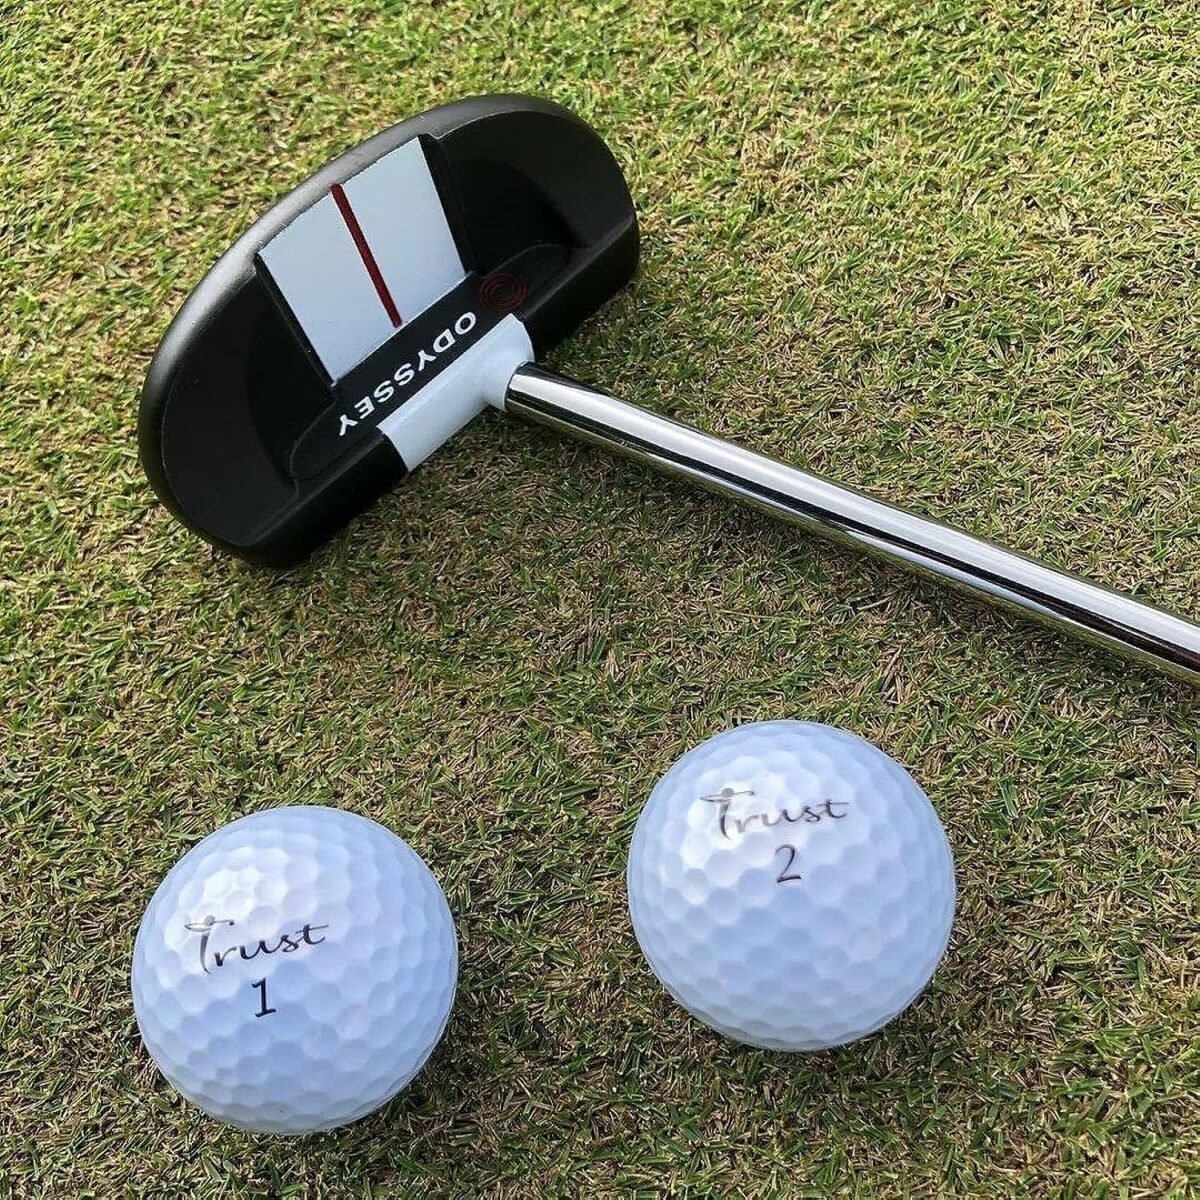 Comparing 5 Golf Balls for Distance and Feel